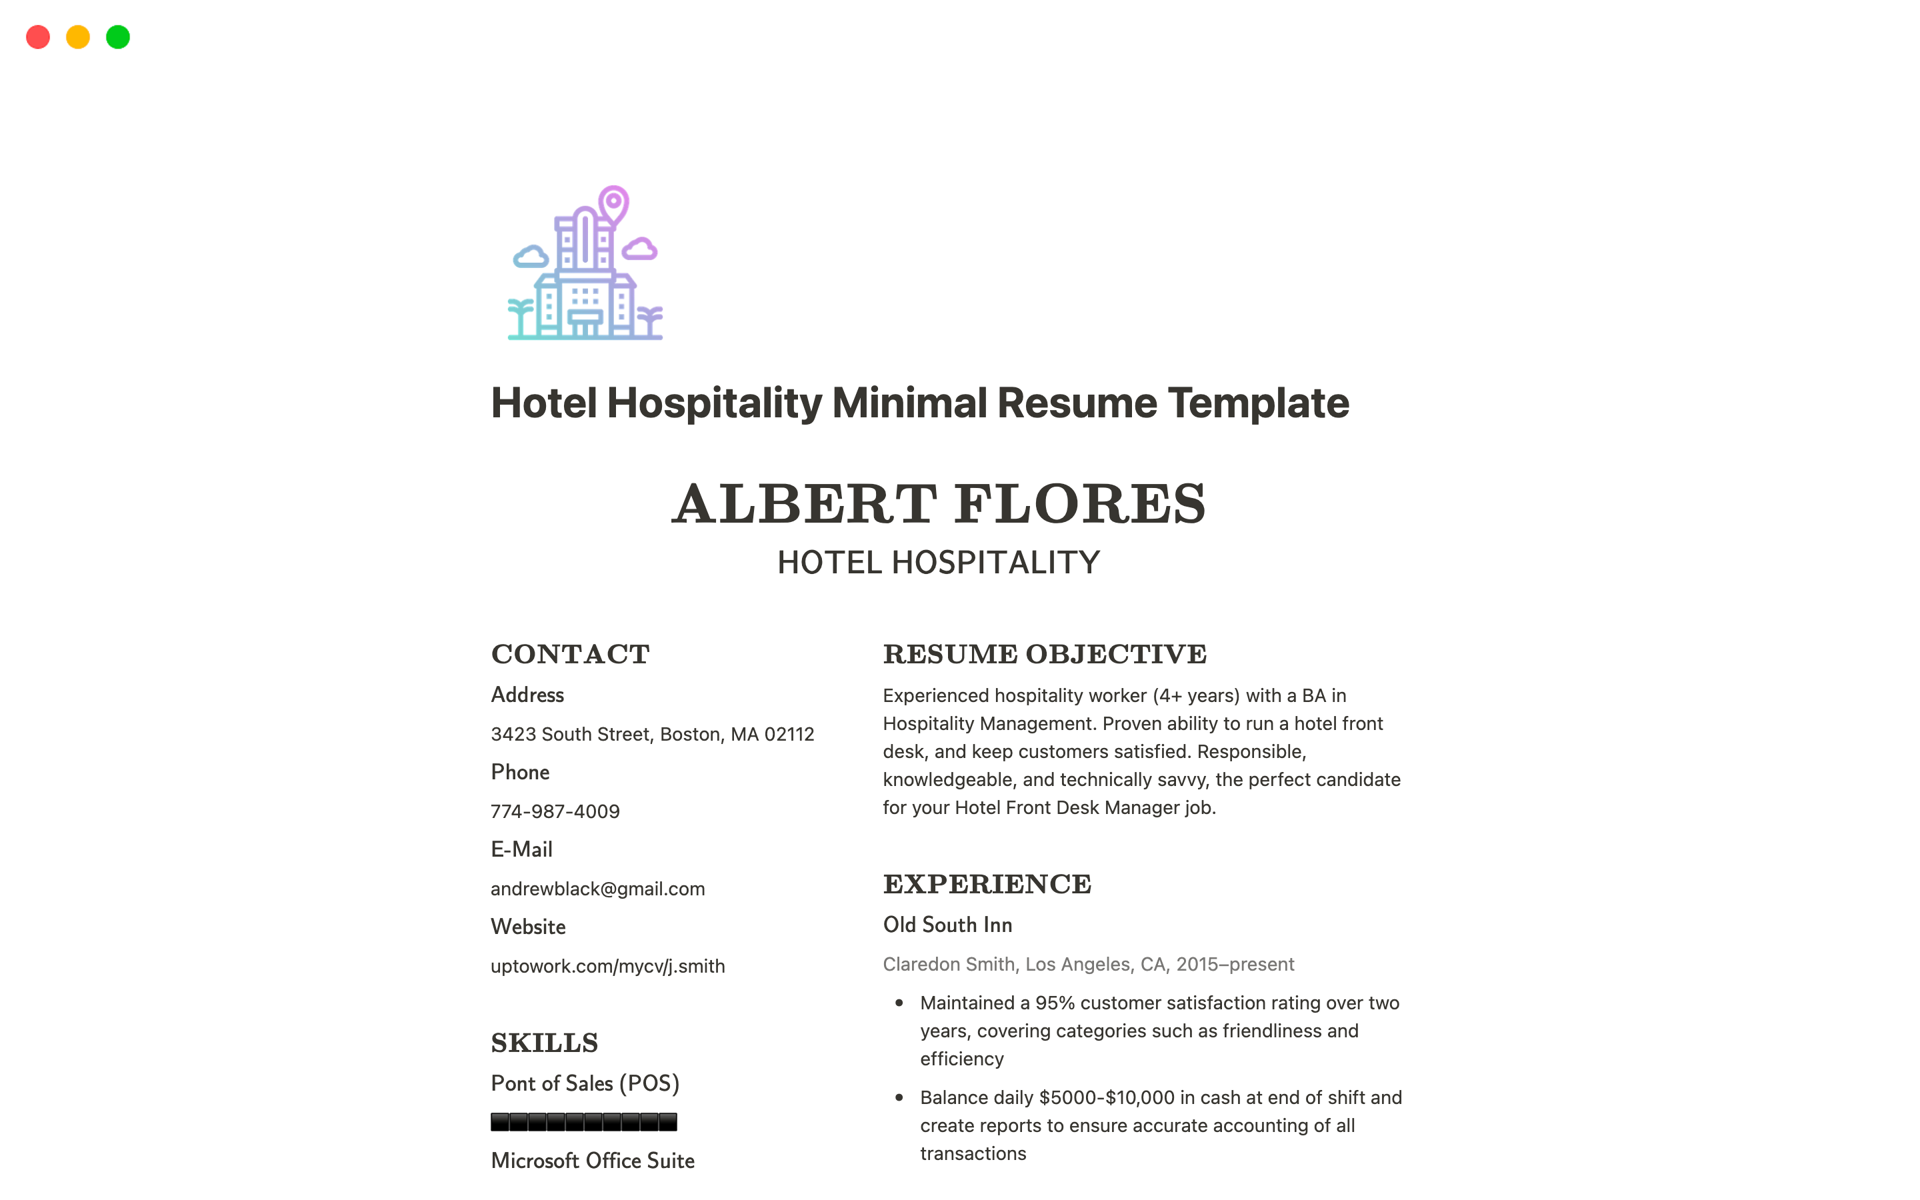 A template preview for Hotel Hospitality Minimal Resume